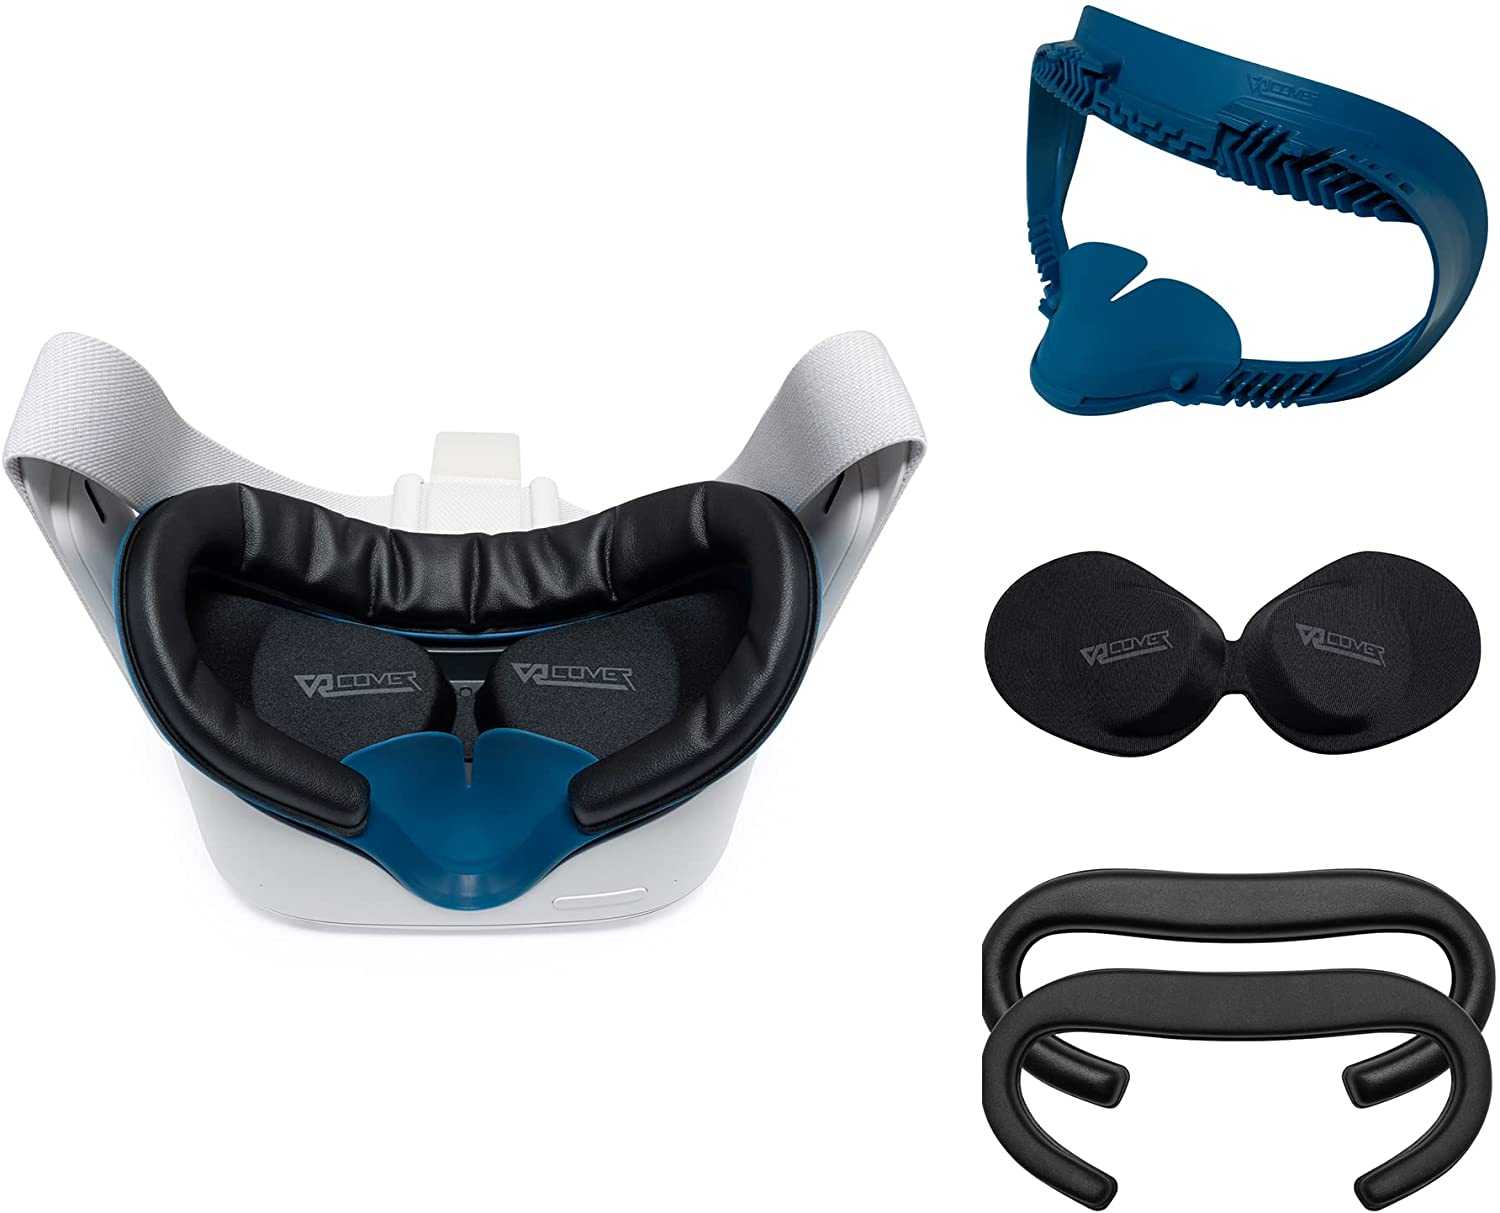 VR Cover Fitness Facial Interface Review